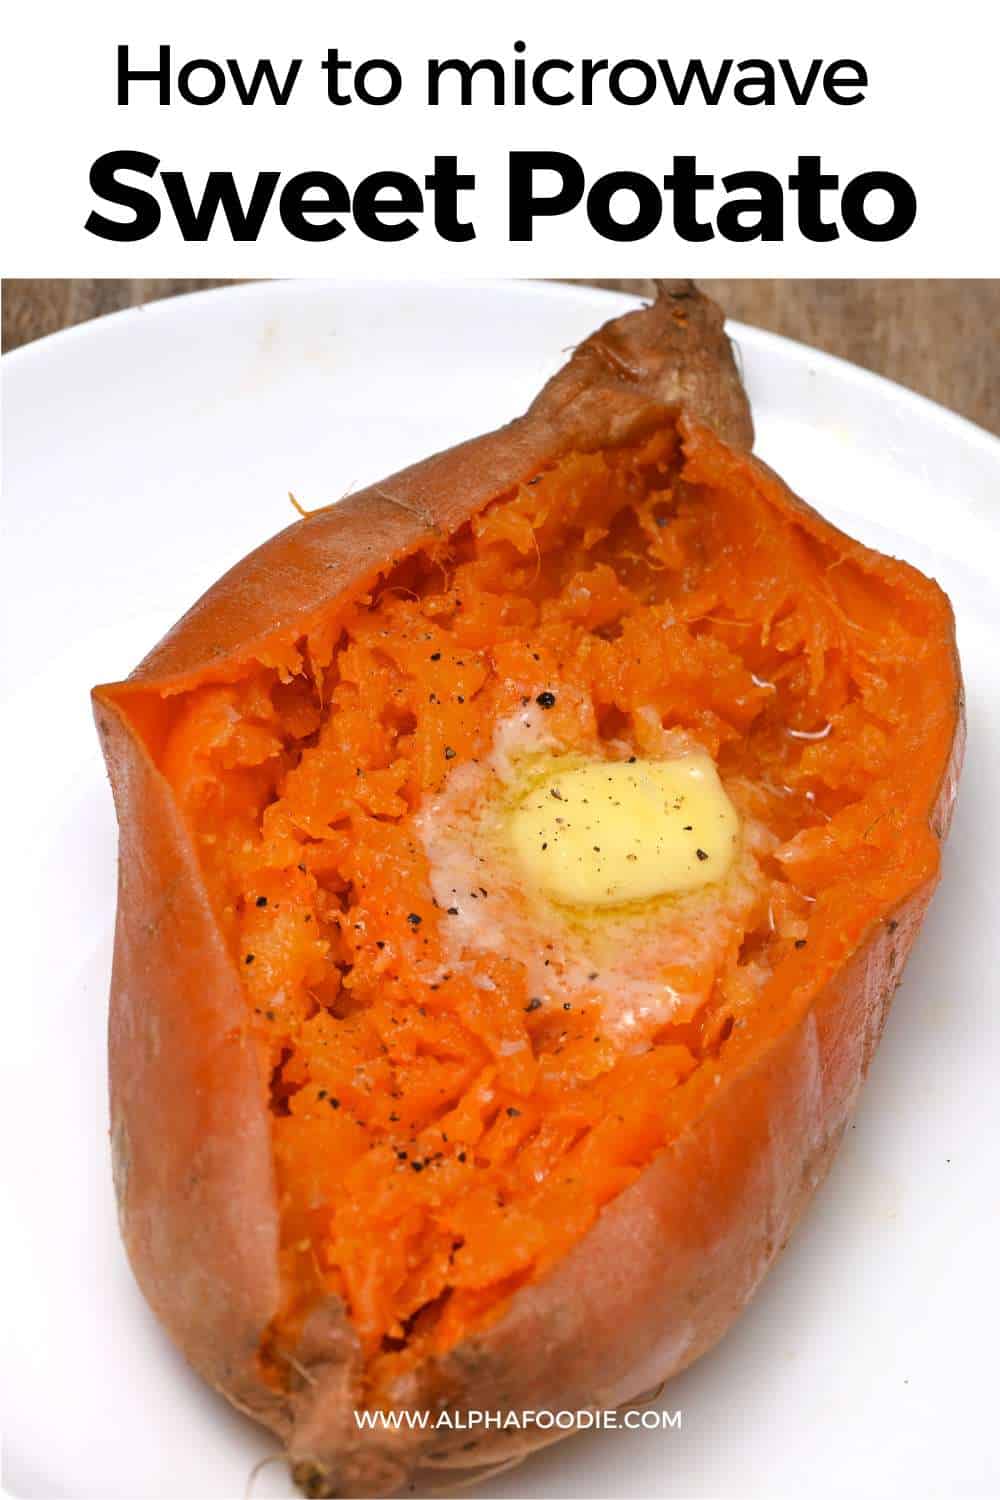 The Perfect Microwave Sweet Potato - Alphafoodie